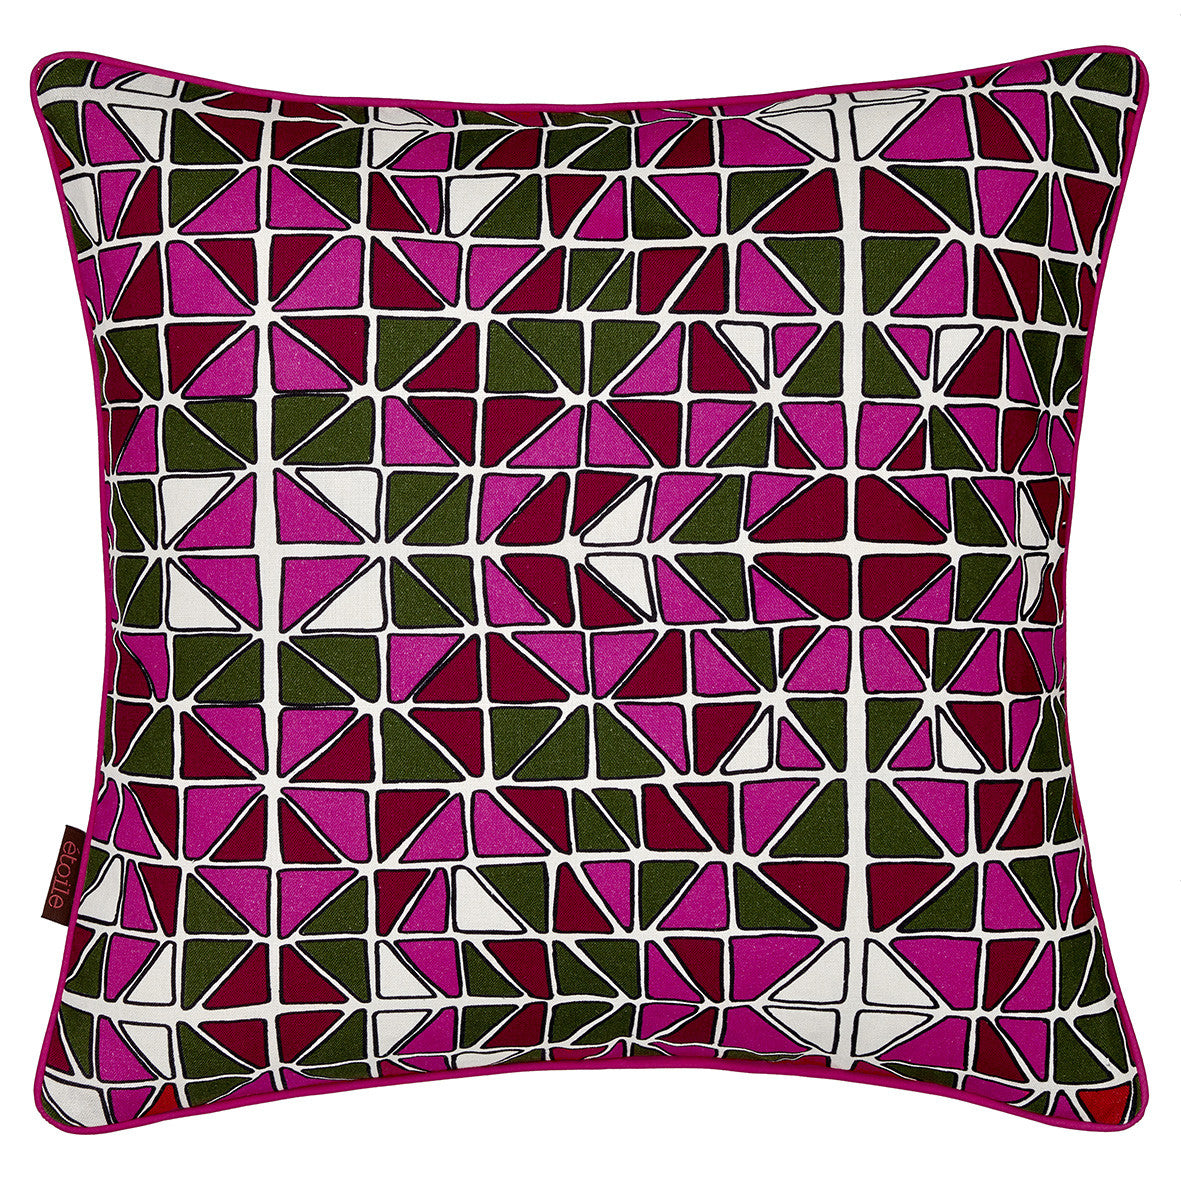 Mosaic Patterned Printed Linen Union Cushion in Fuchsia Pink, Olive Green and Vermilion Red